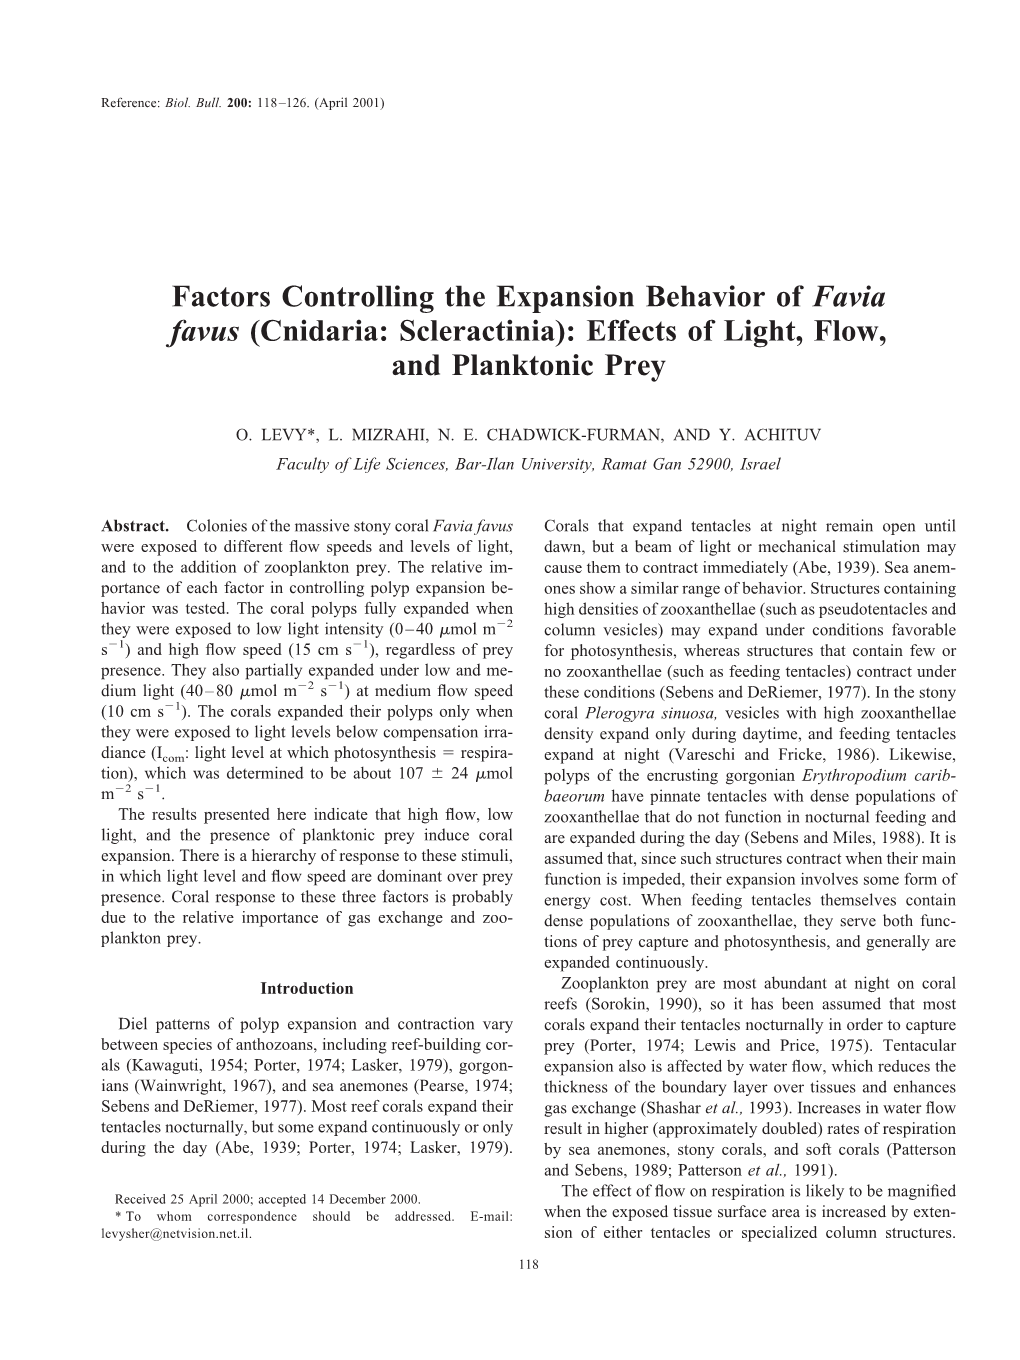 Factors Controlling the Expansion Behavior of Favia Favus (Cnidaria: Scleractinia): Effects of Light, Flow, and Planktonic Prey